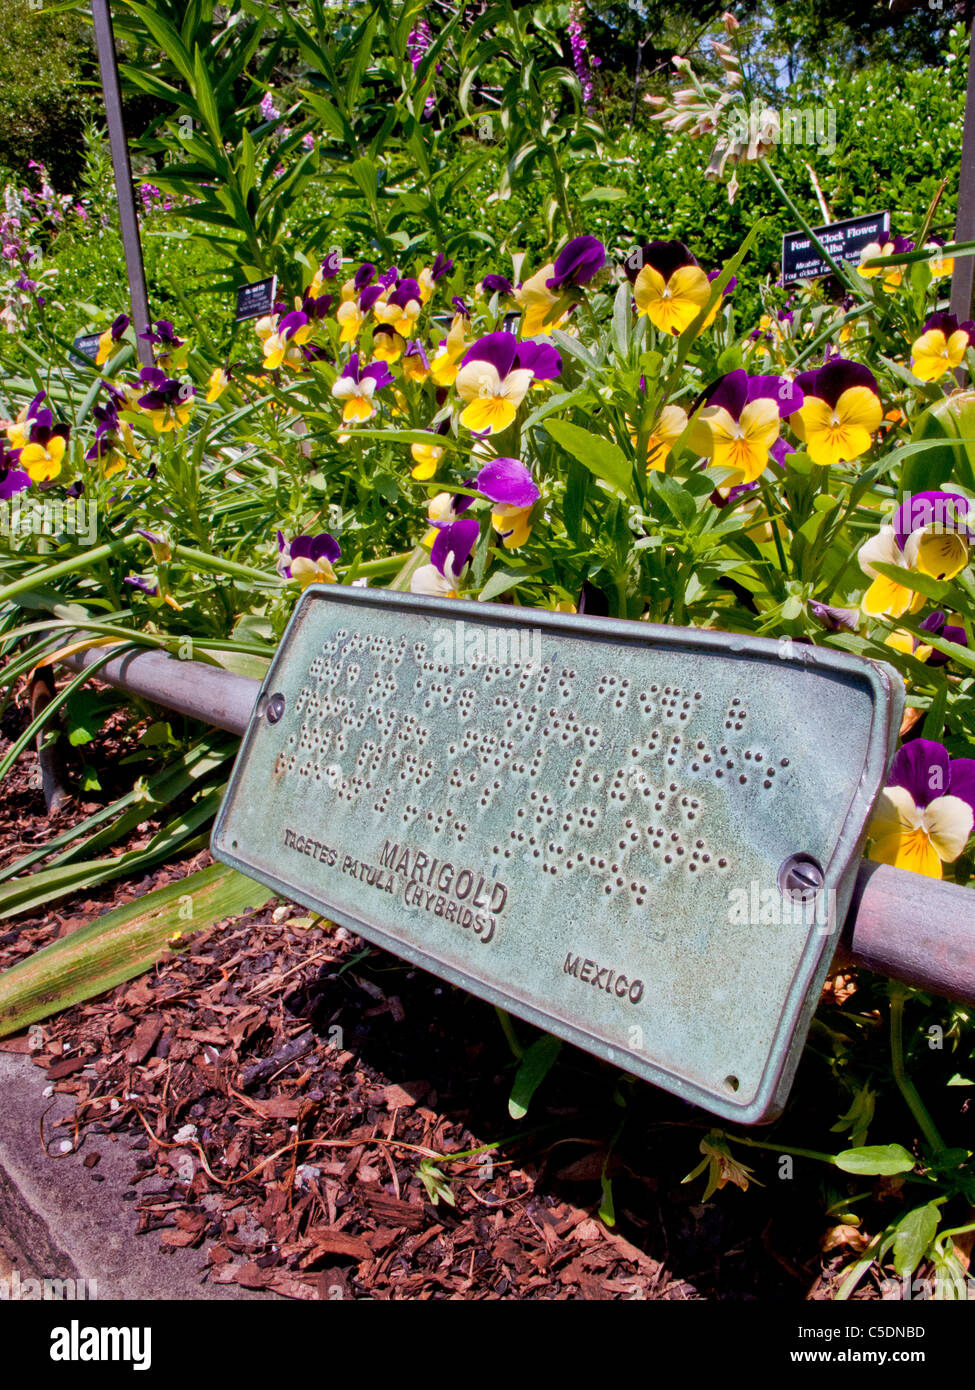 Signs in Braille guide the vision-impaired at the Alice Recknagel Ireys Fragrance Garden of the Brooklyn Botanic Garden in NY. Stock Photo